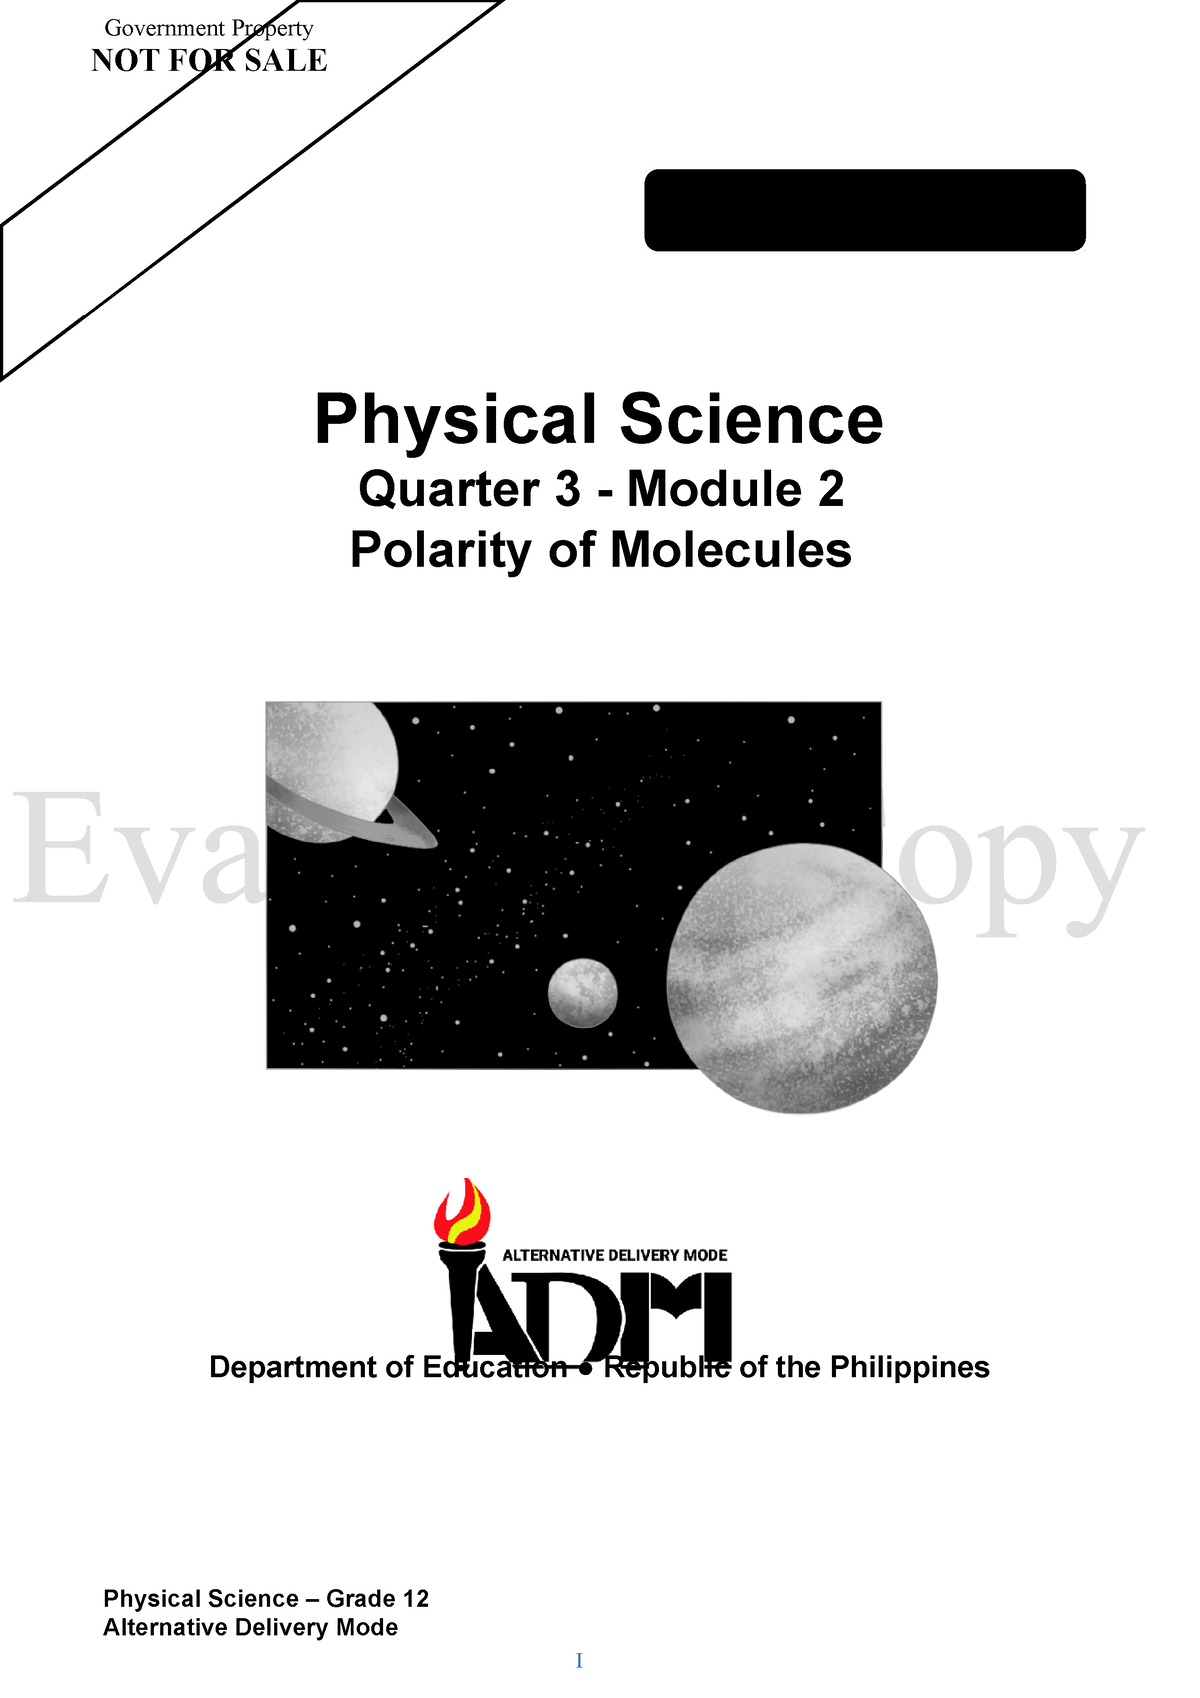 Physical Science Q3 Module 2 V5 Physical Science Quarter 3 Module 2 Polarity Of Molecules 0484